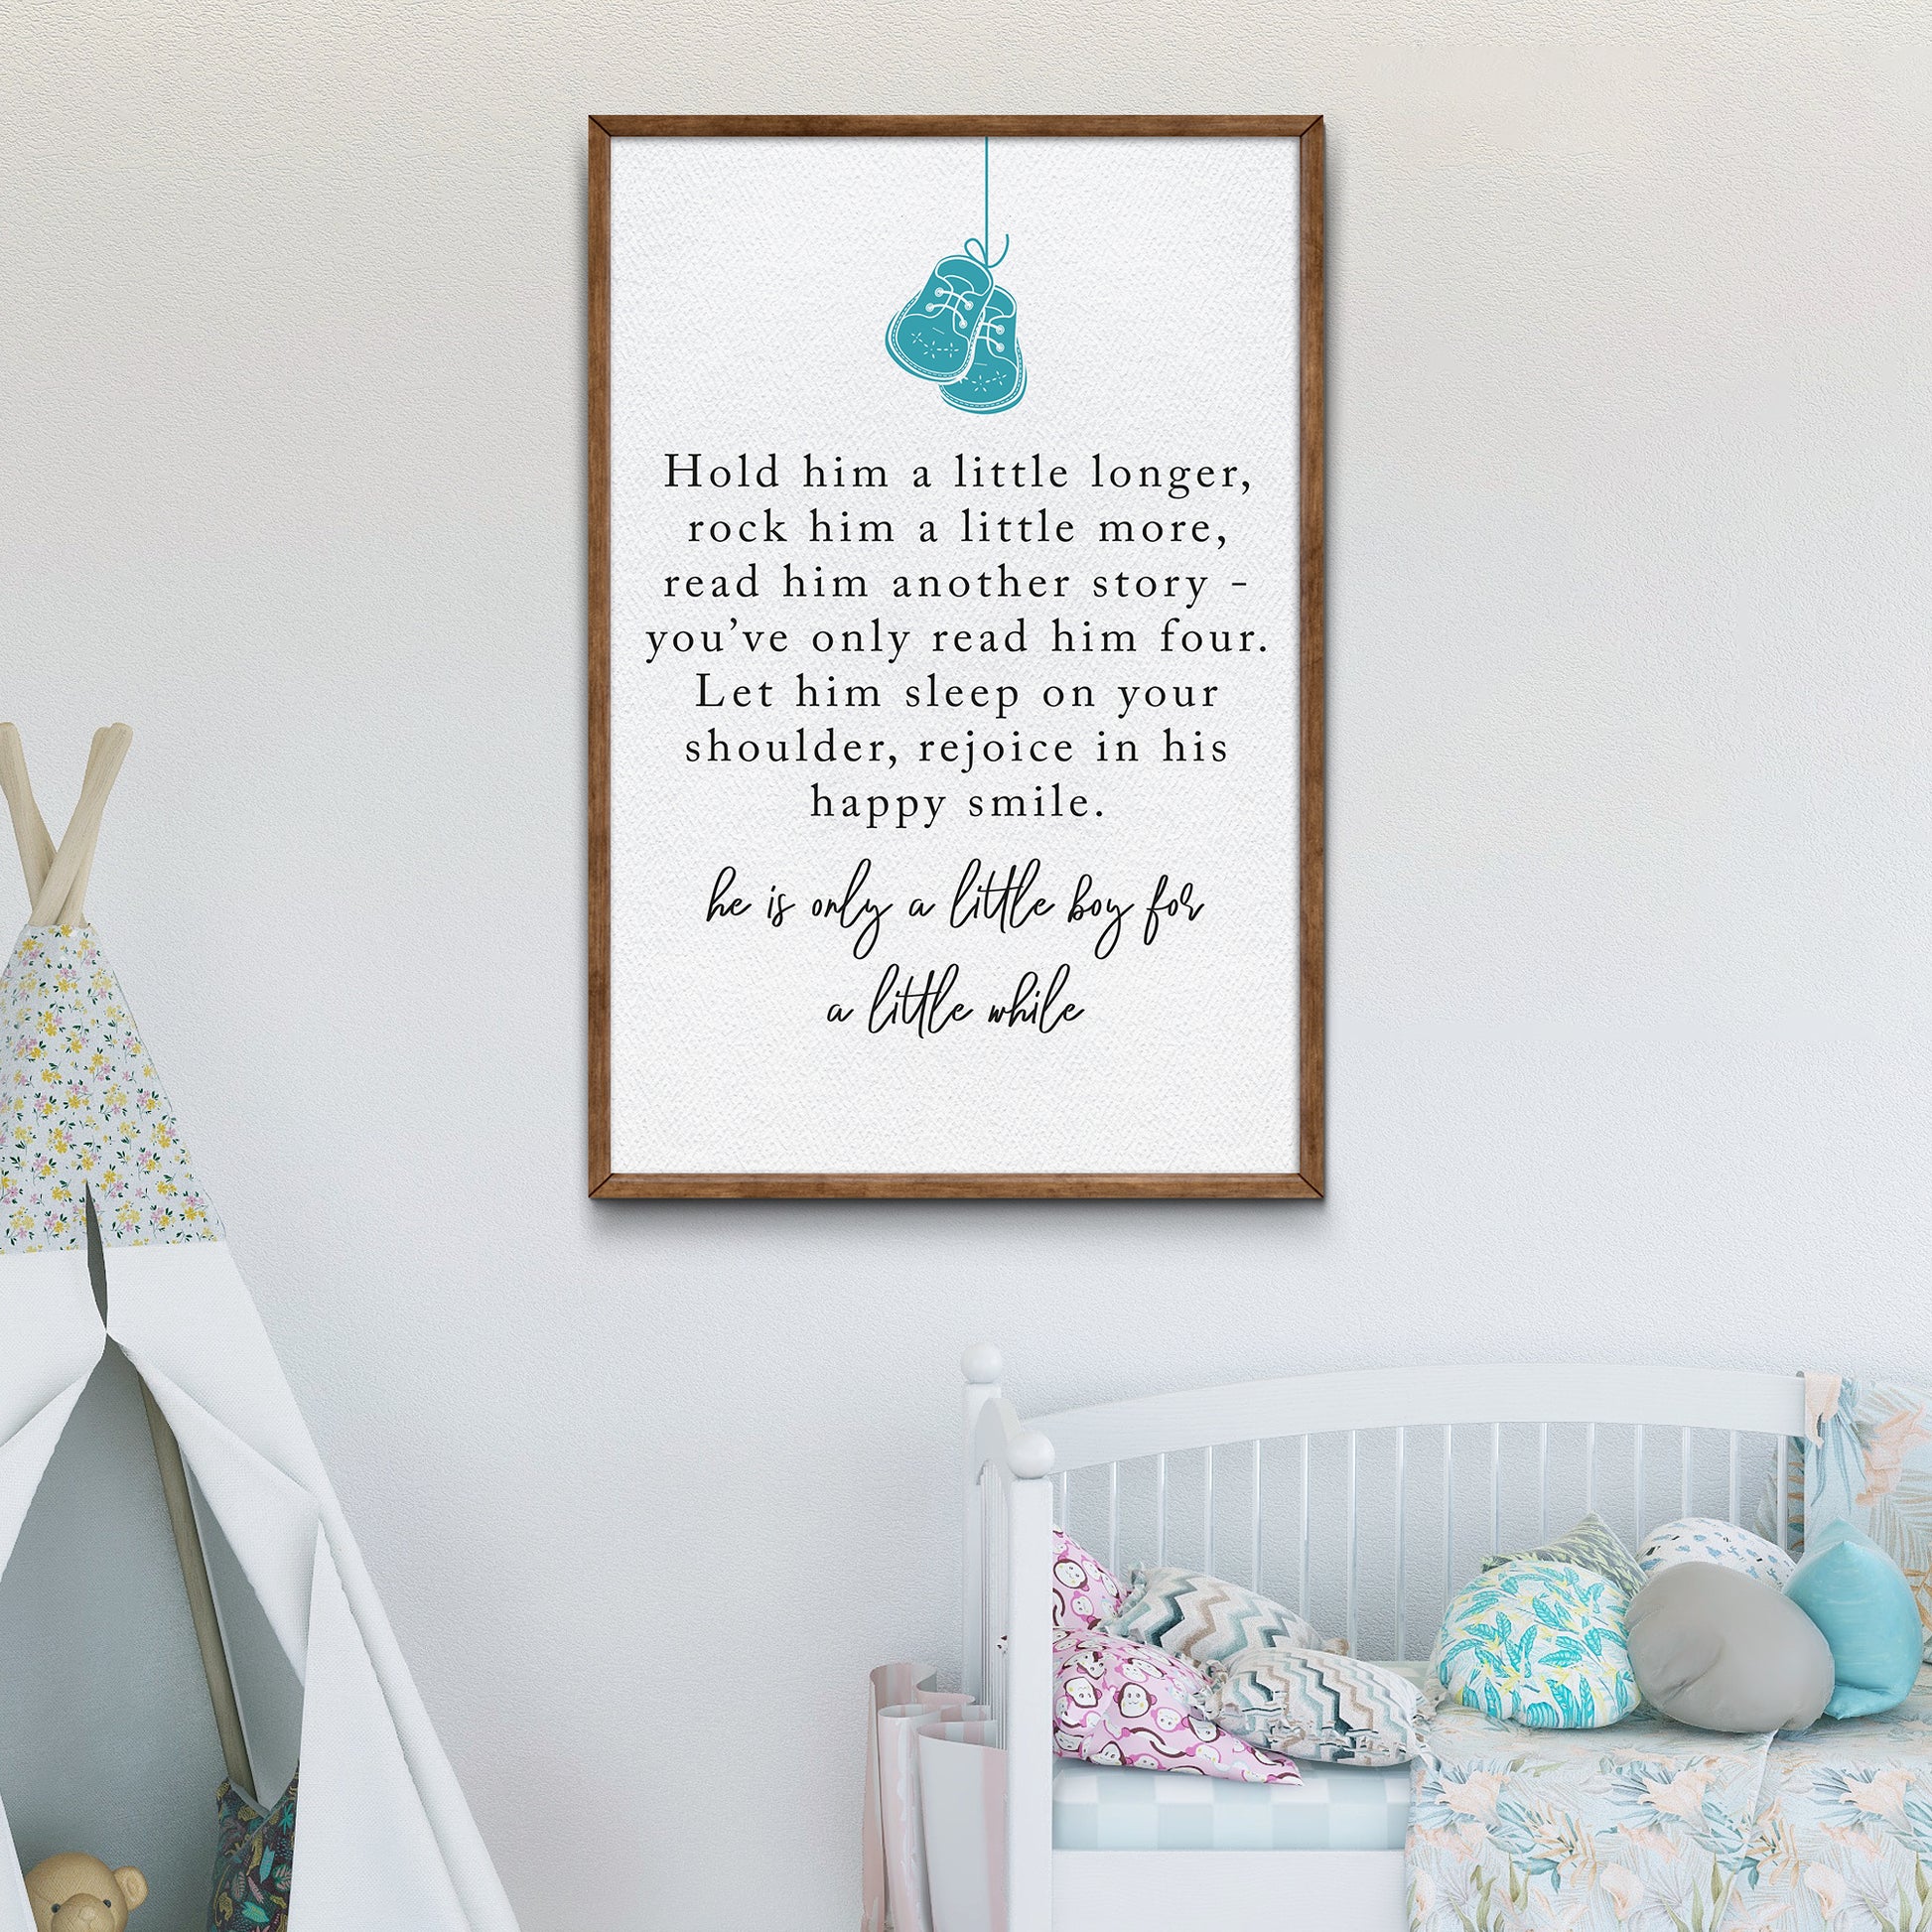 He Is Only A Little Boy For A Little While Sign - Image by Tailored Canvases